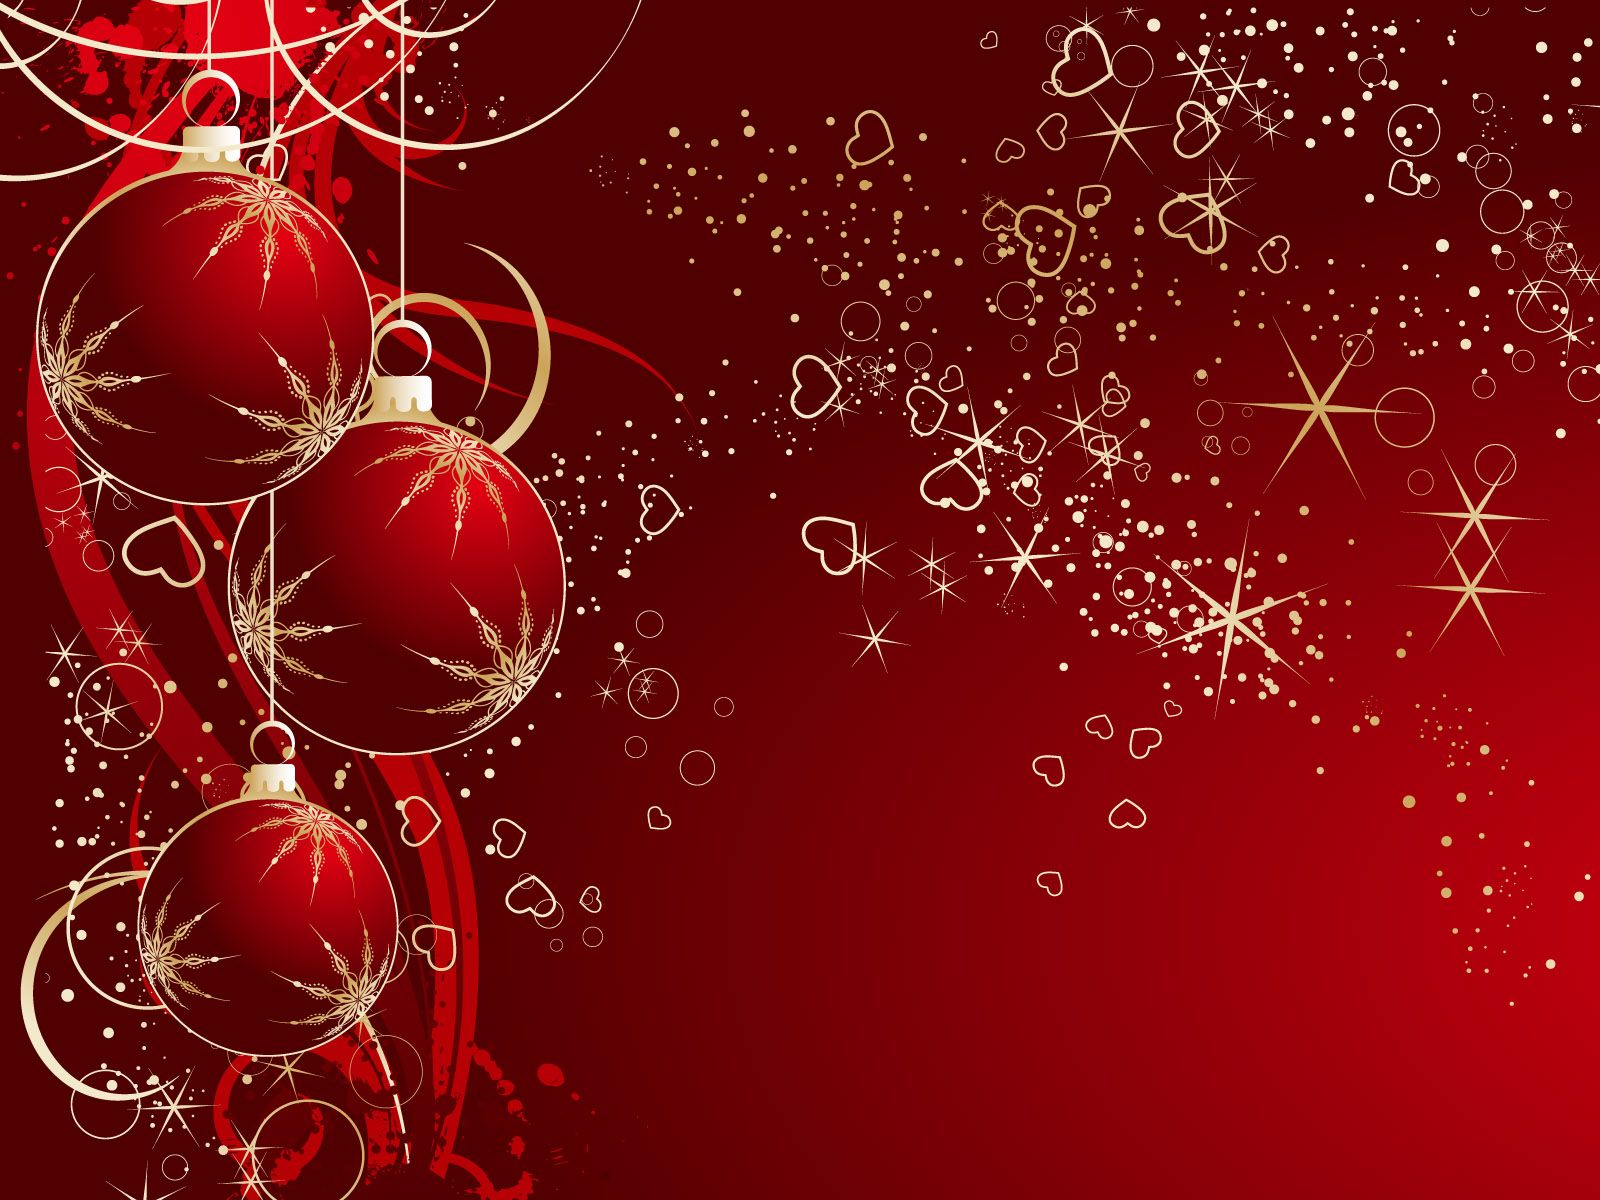 Free Christmas Backgrounds Free For Desktop